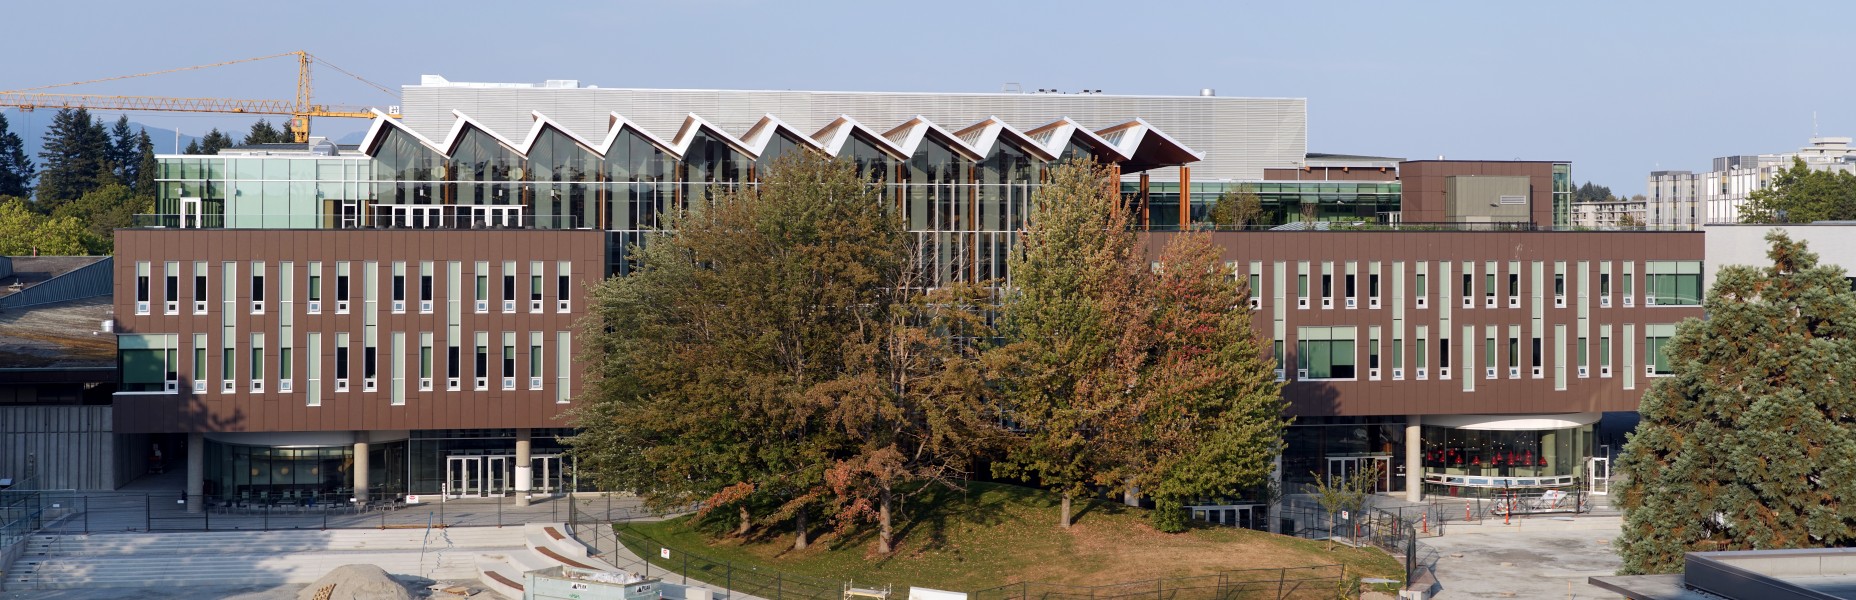 New Student Union Building of the University of British Columbia